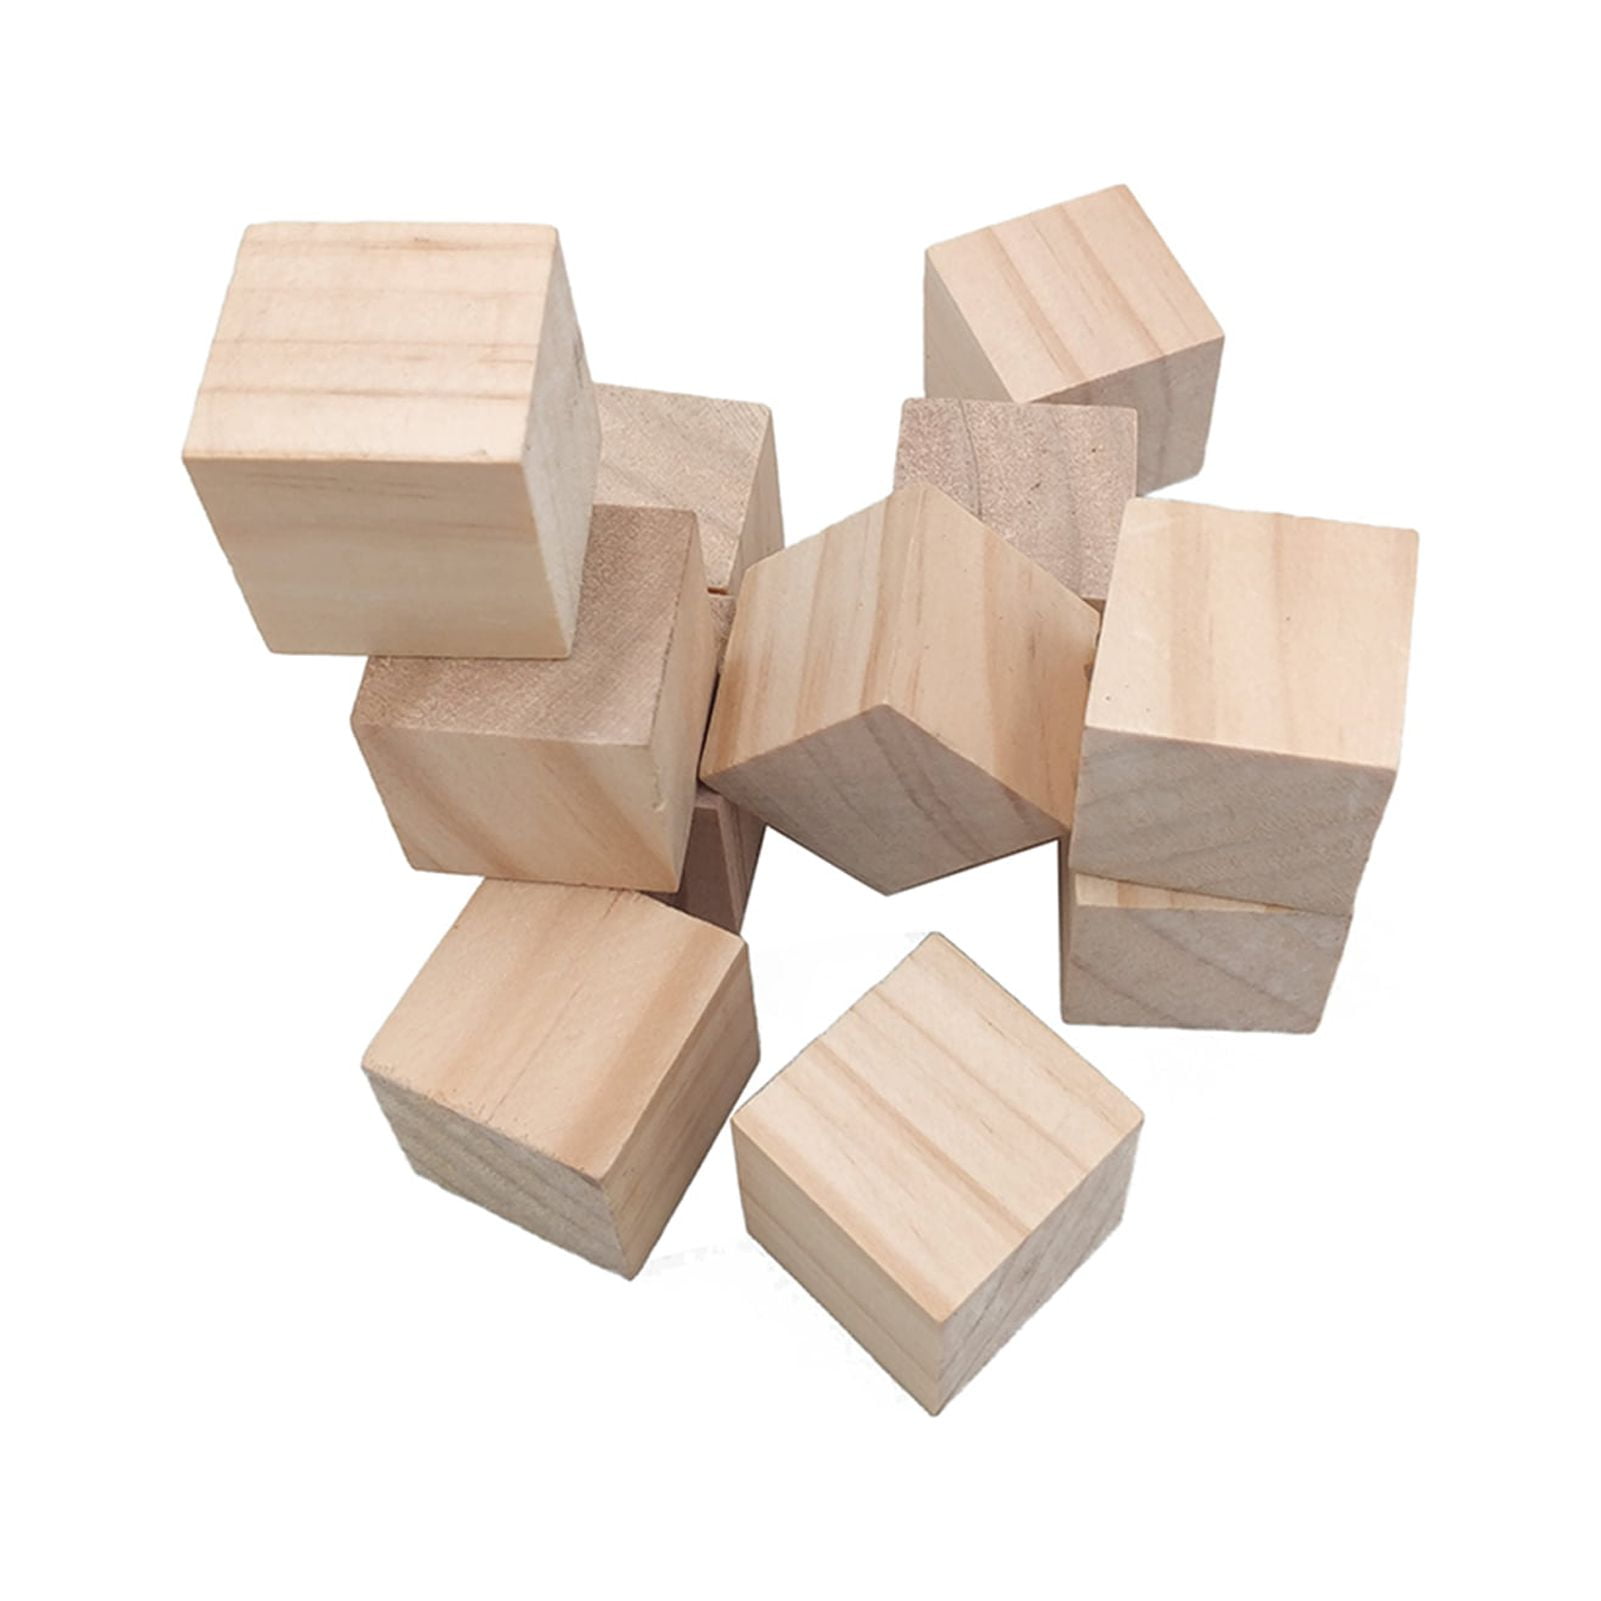 Two Trees Unfinished Wooden Blocks 15mm Pack of 50 Small Wood Cubes for Engraver Crafts Making and DIY Home Decor Engraving Projects, Size: 2